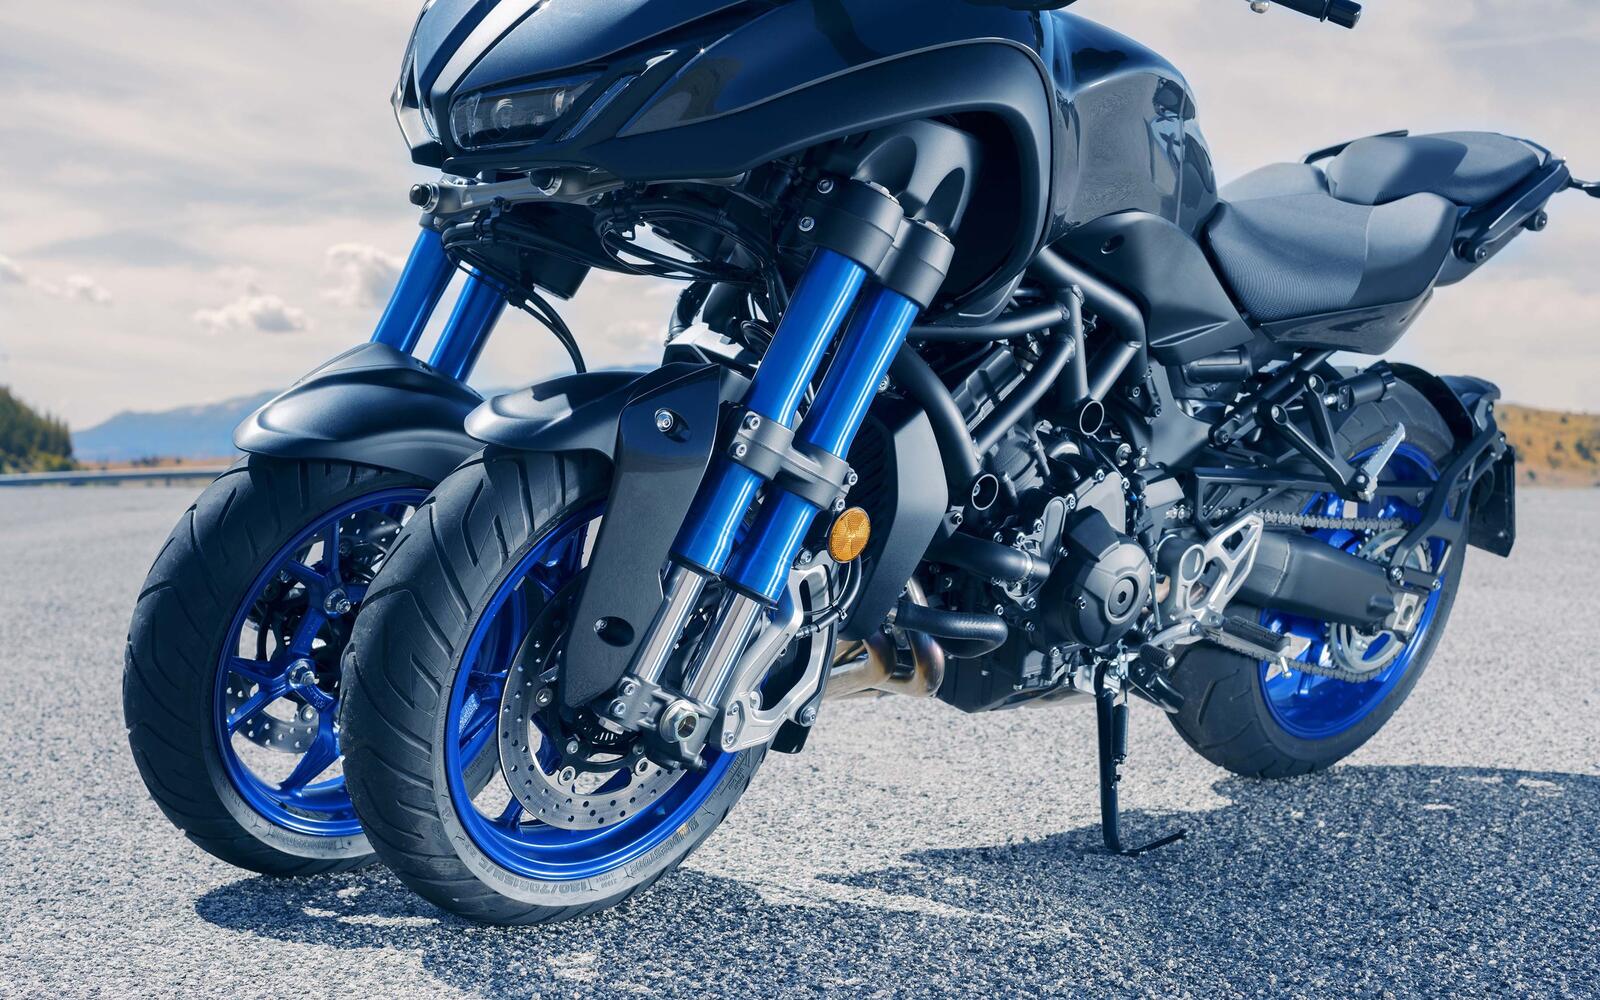 Free photo Yamaha niken 2019 motorcycle with two front wheels